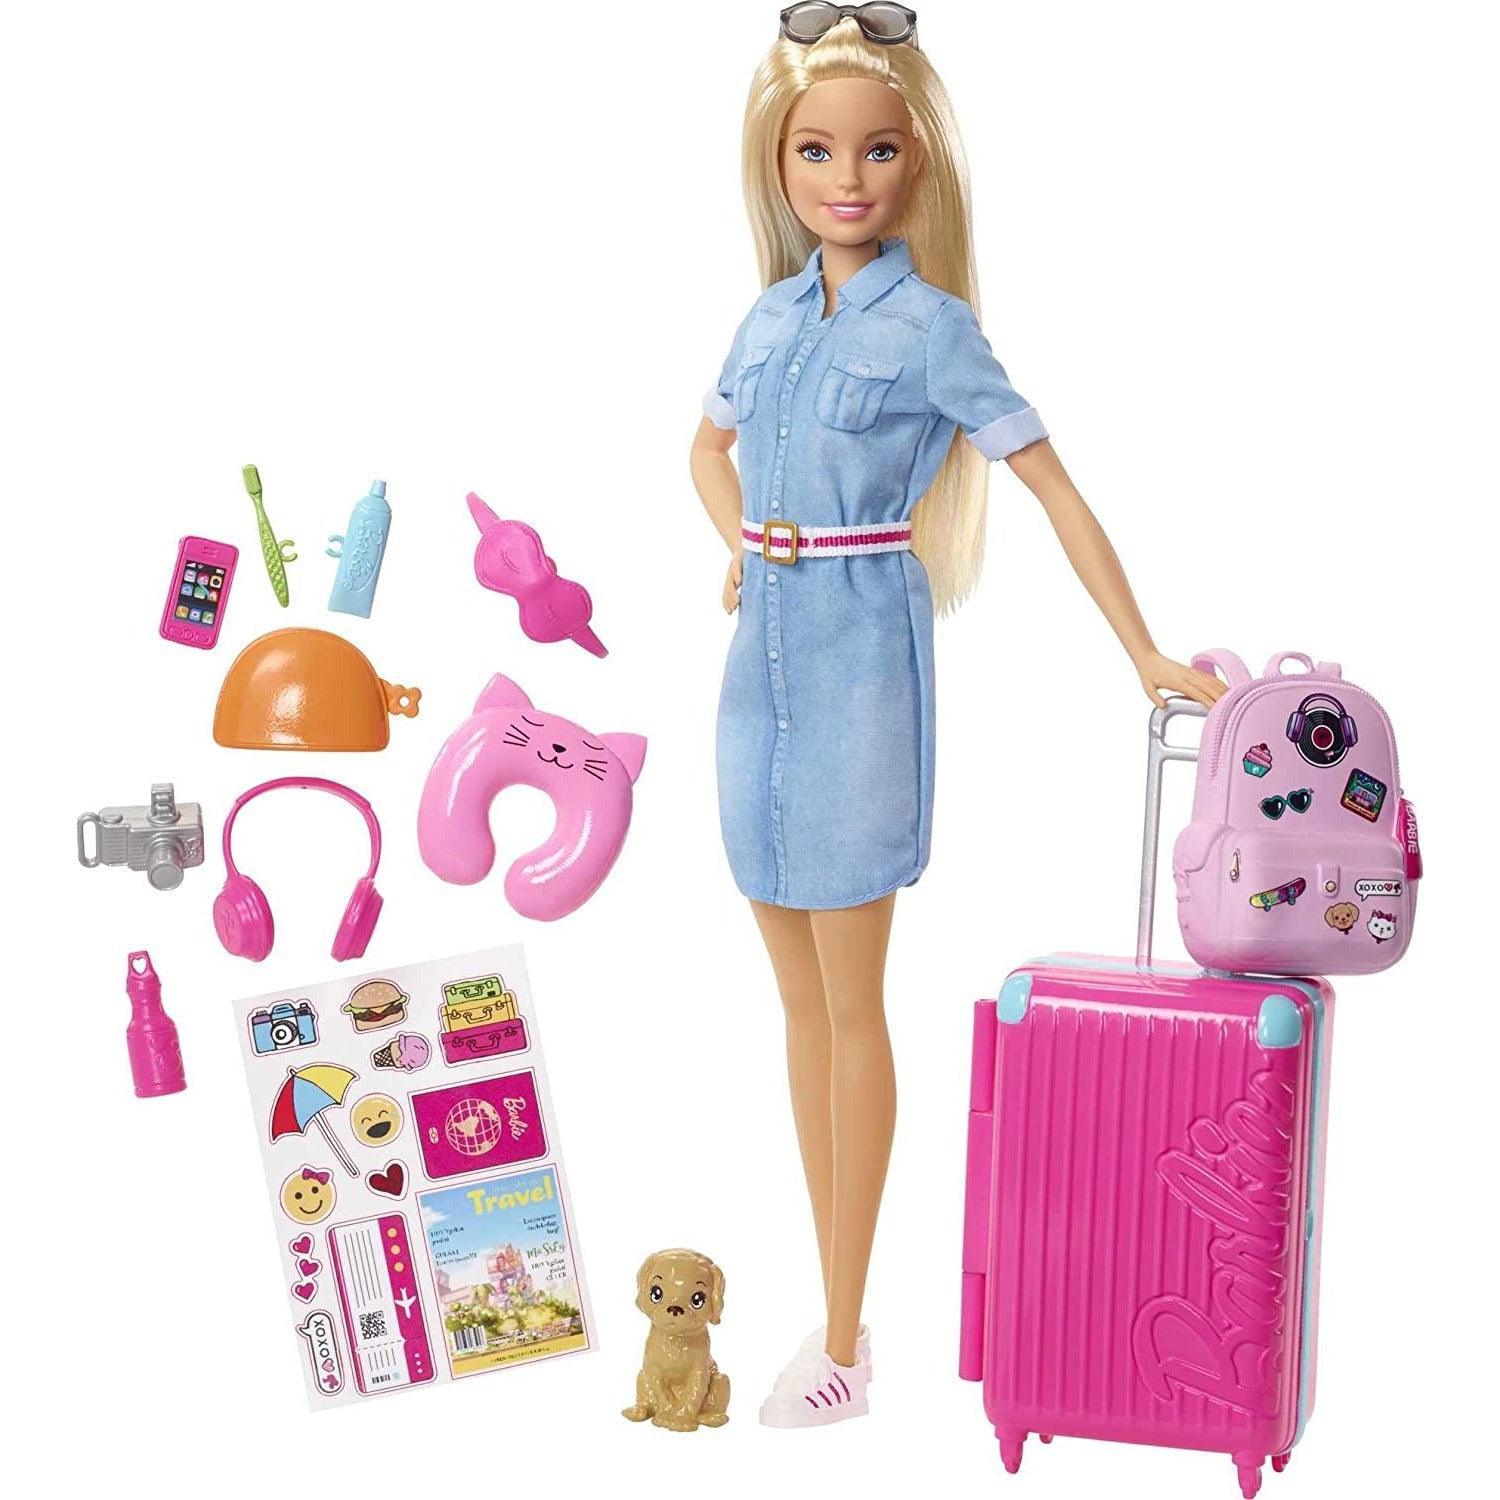 Barbie Doll and Travel Set with Puppy, Luggage & 10+ Accessories - BumbleToys - 2-4 Years, 3+ years, 4+ Years, 5-7 Years, Barbie, Dolls, Fashion Dolls & Accessories, Girls